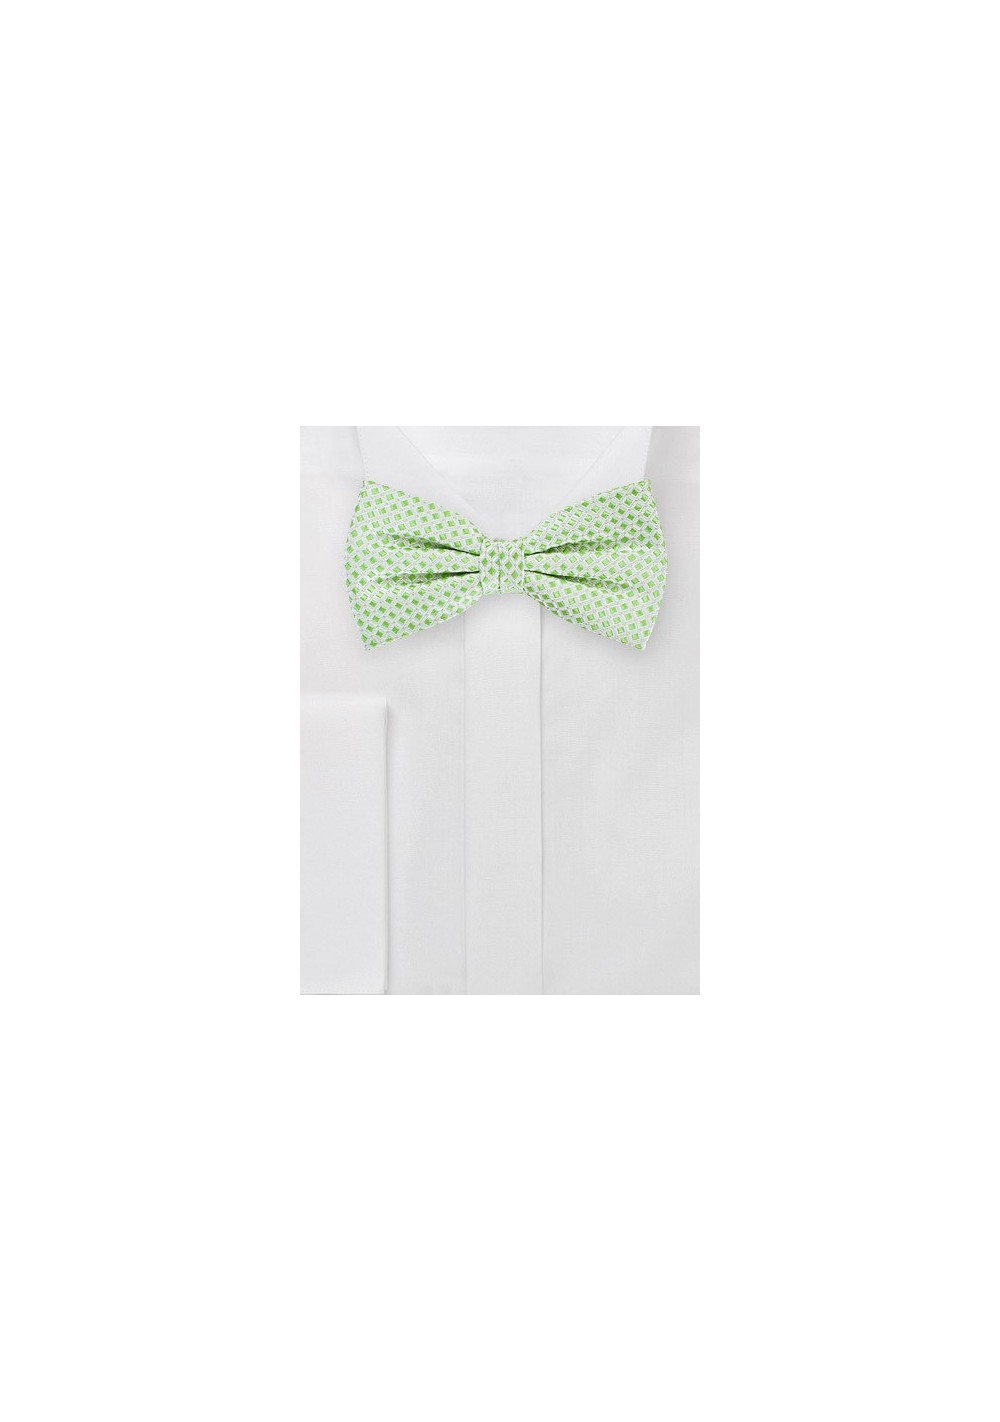 Square Patterned Bow Tie in Silver and Lime